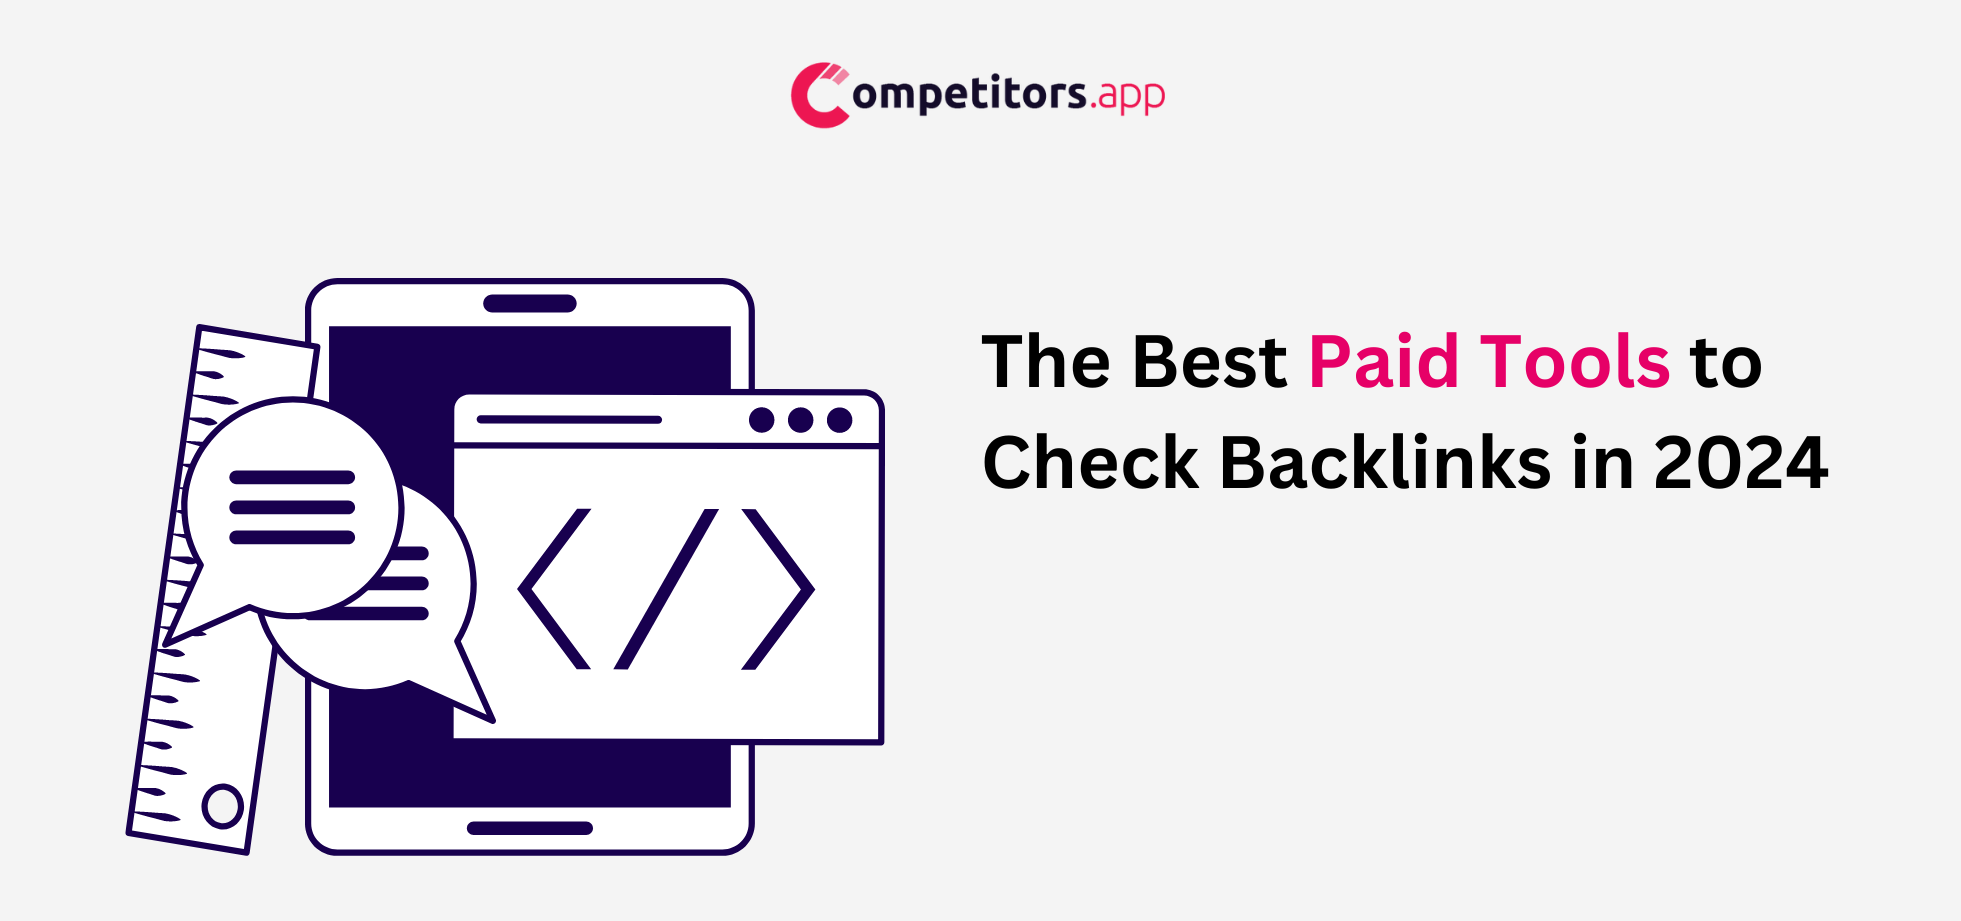 The Best Paid Tools to Check Backlinks